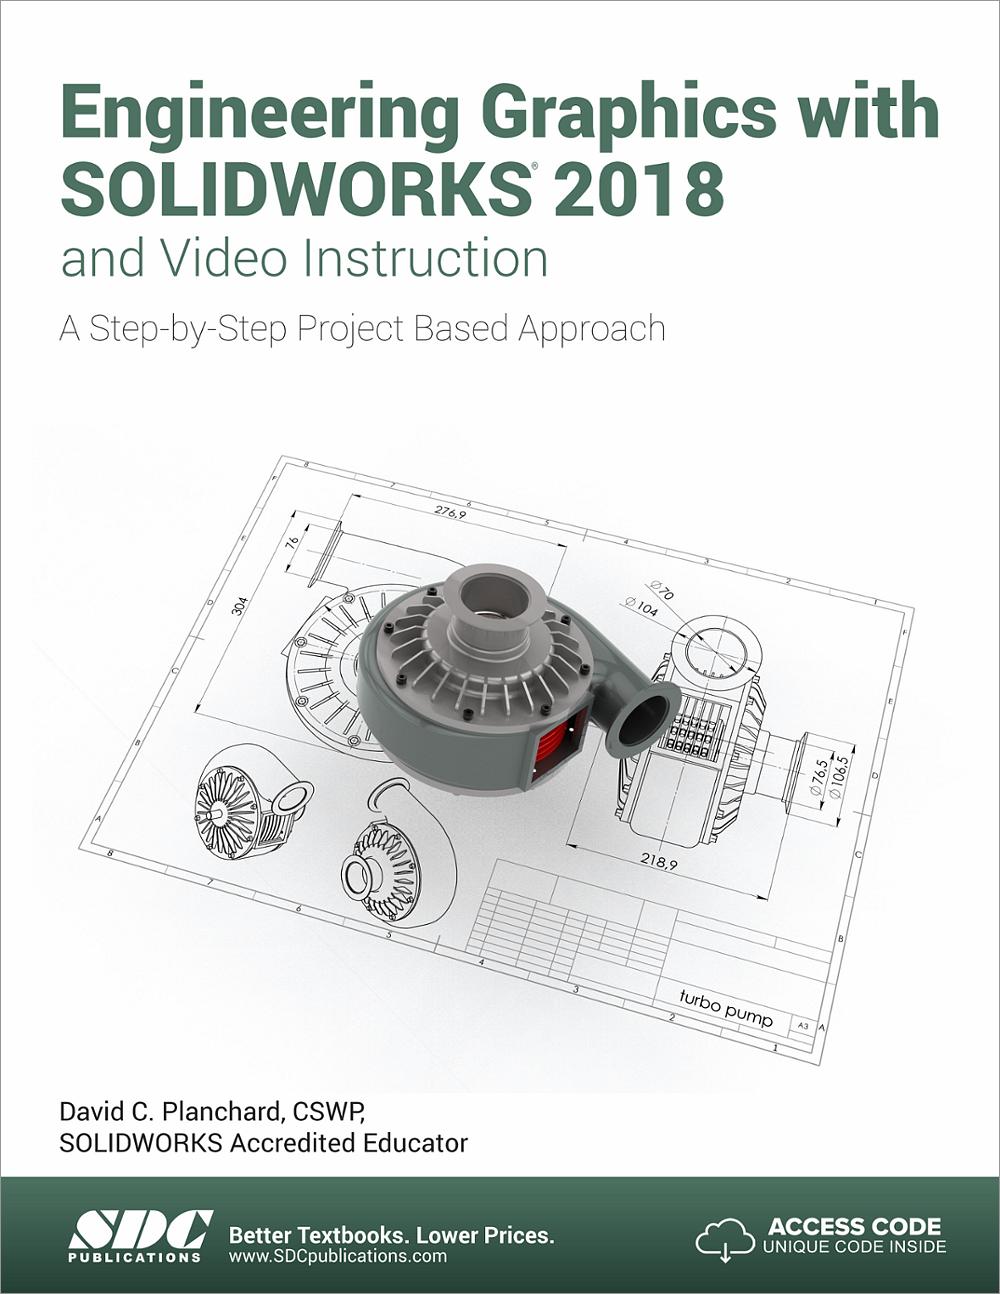 parametric modeling with solidworks 2018 pdf download